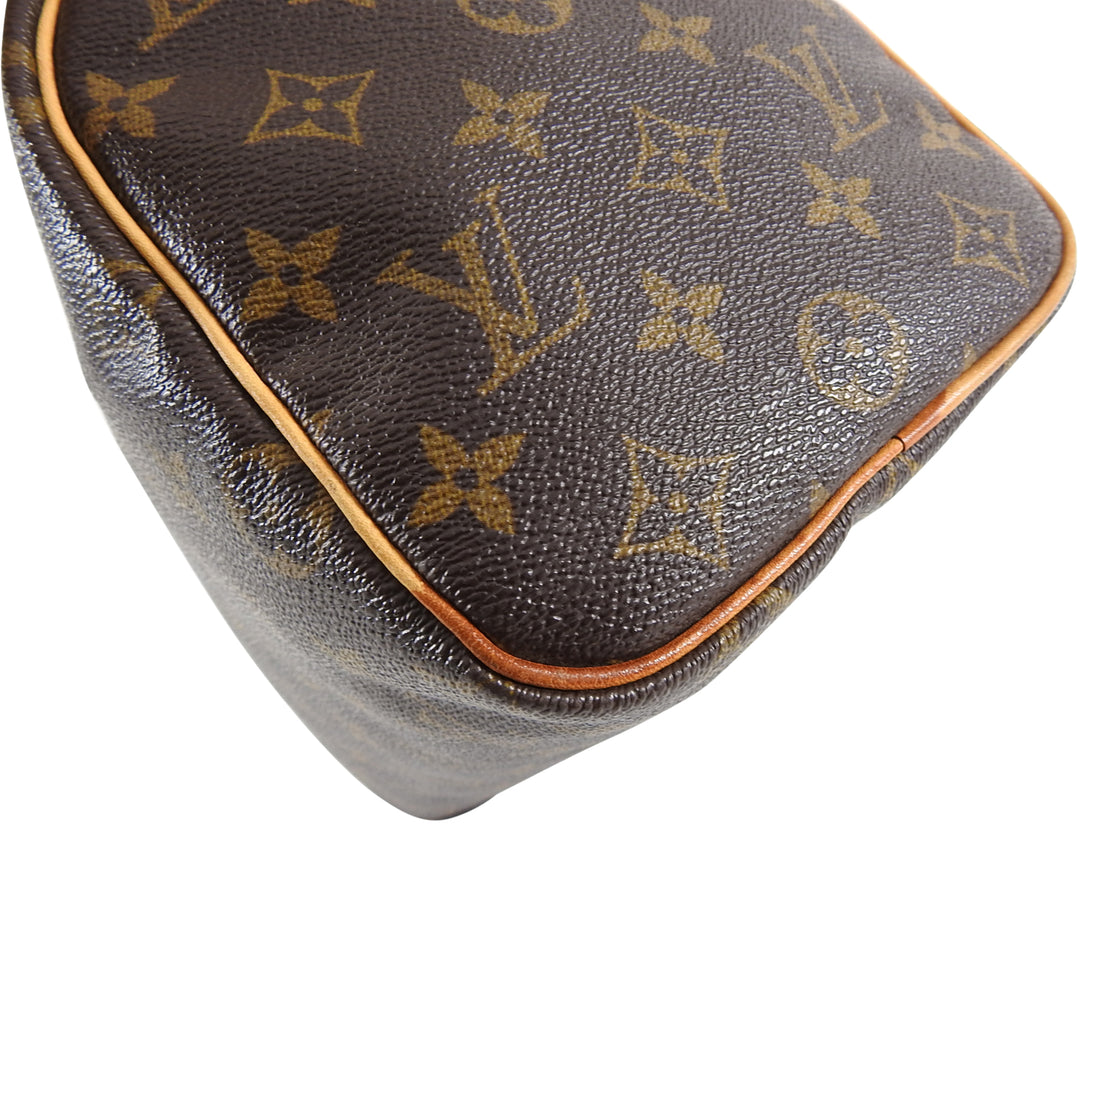 Speedy doctor 25 patent leather handbag Louis Vuitton Multicolour in Patent  leather - 37902674